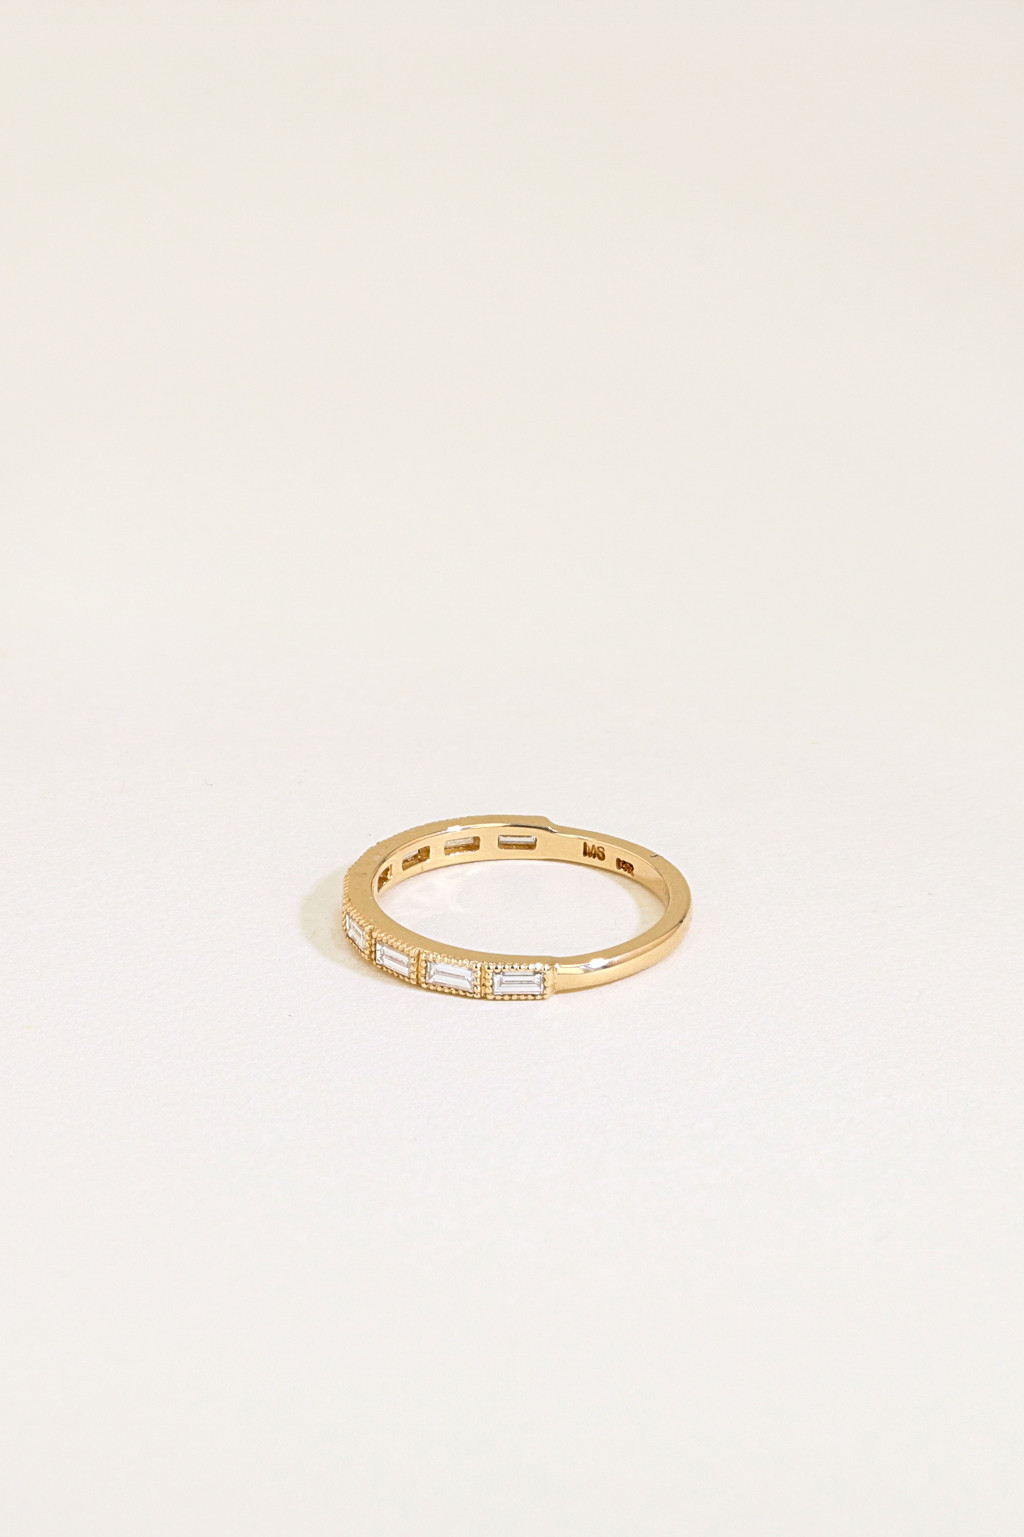 The Diamond Baguette Ring side view